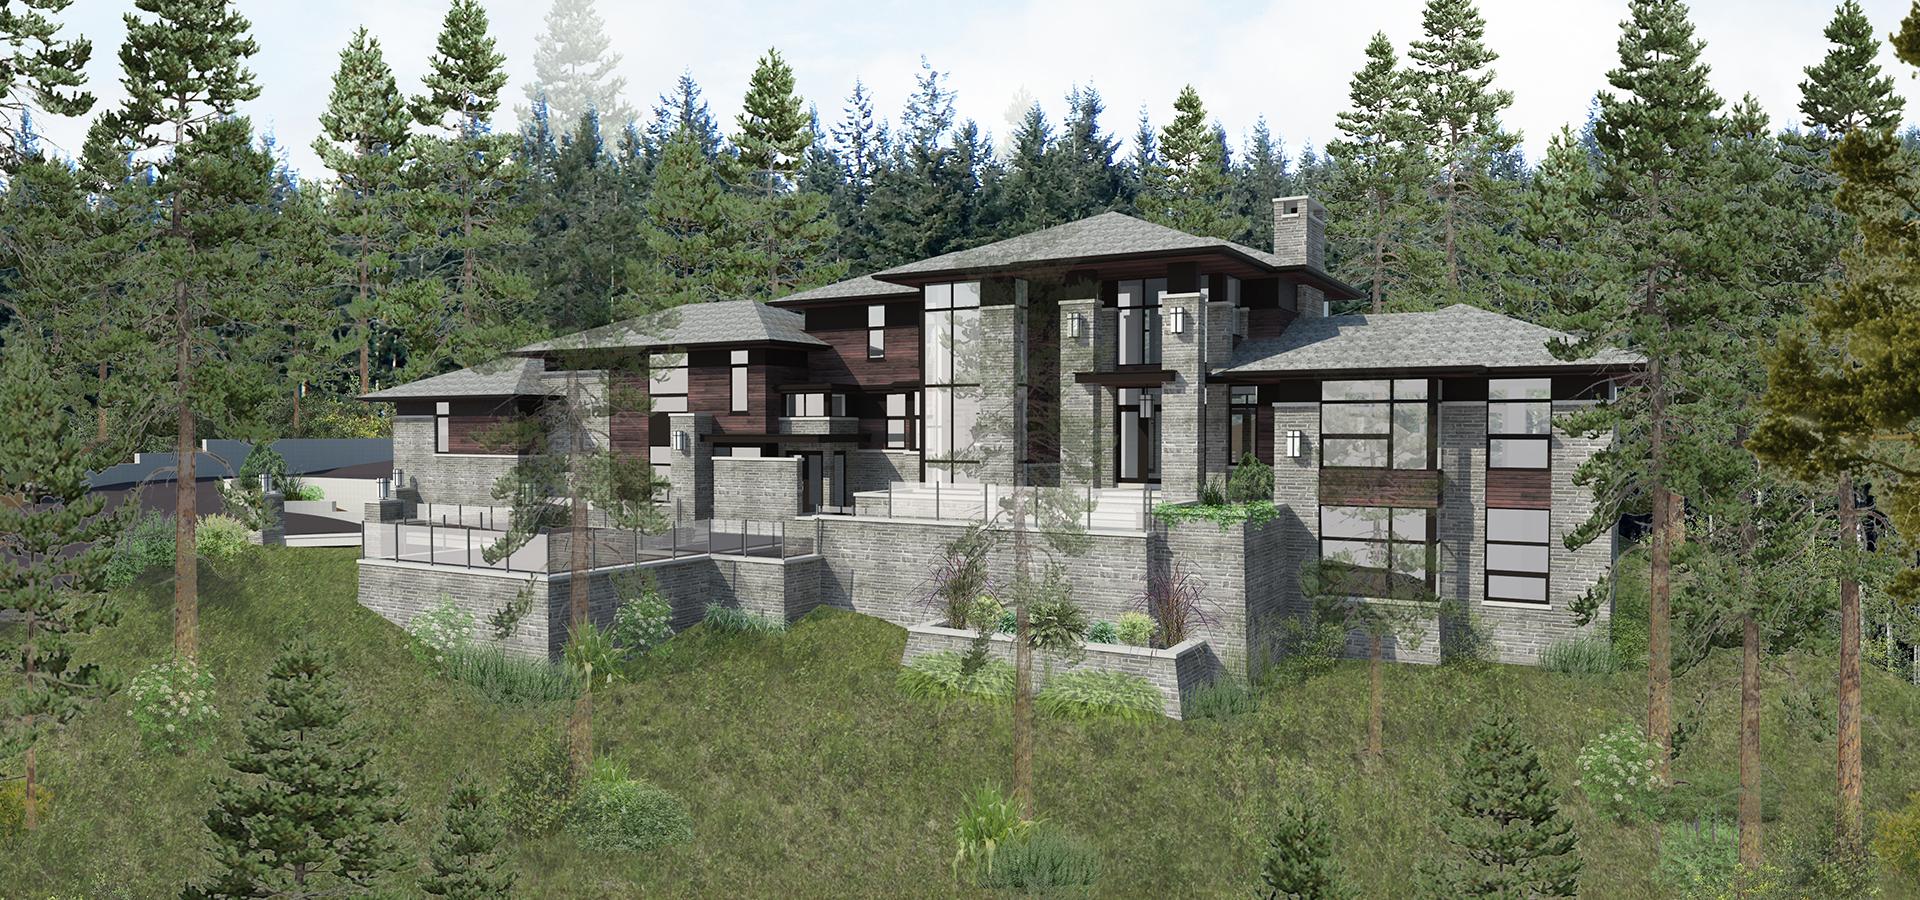 3d rendering of home with wood siding, stone retaining wall and wall sconce.